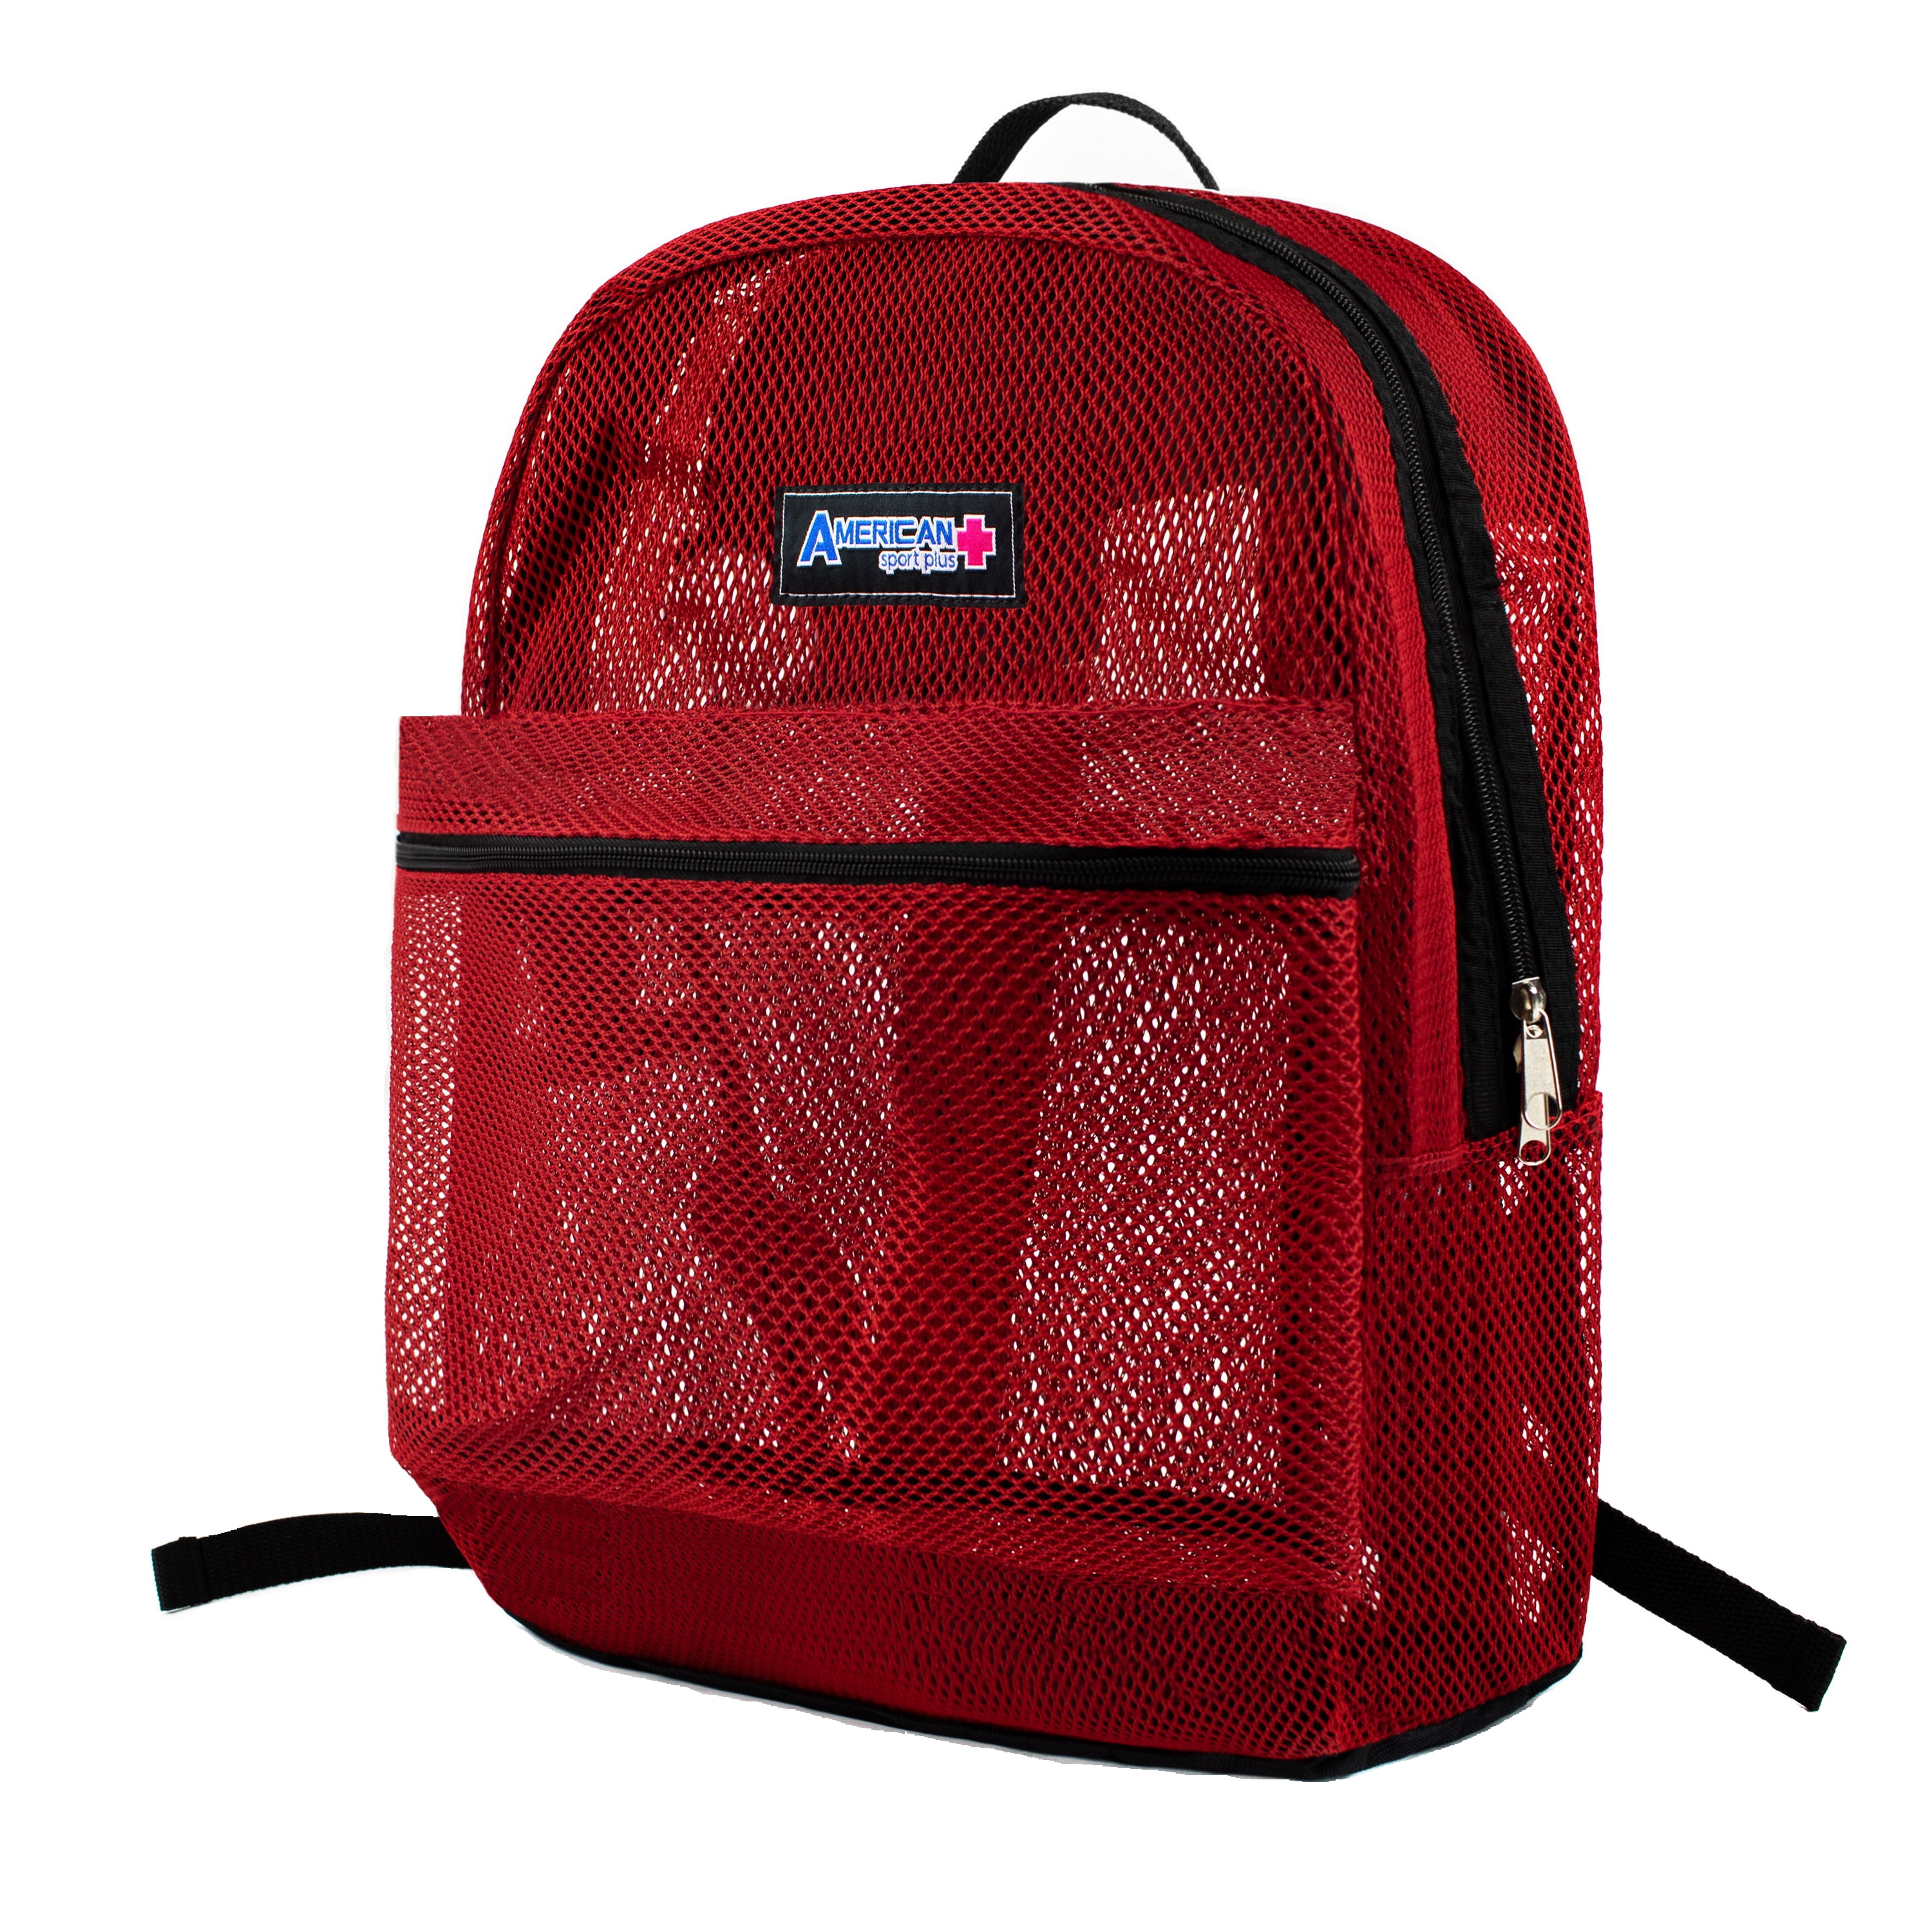 red backpack for travel